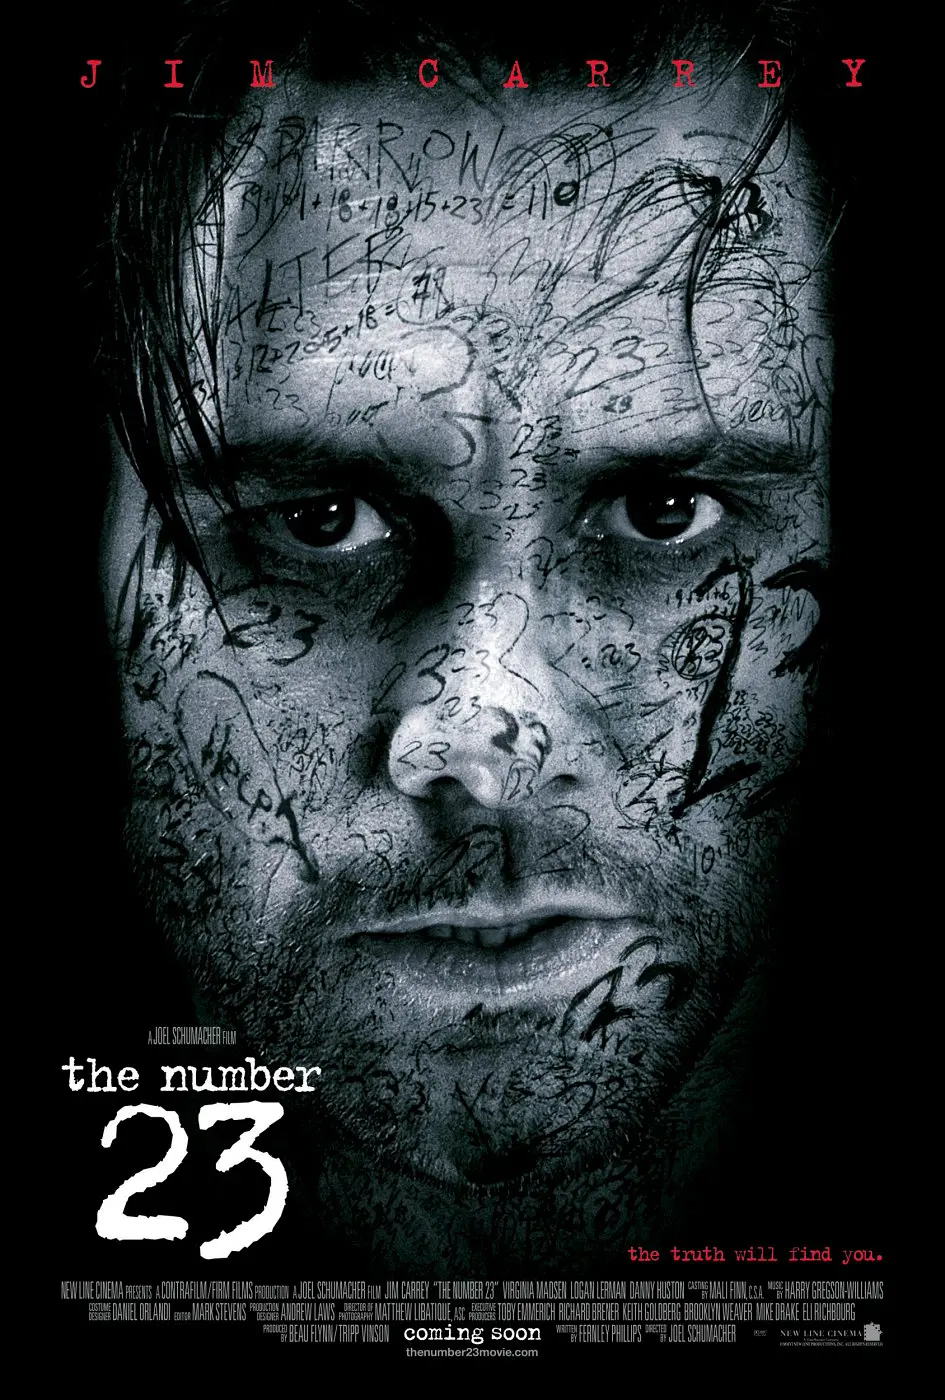 assets/img/movie/The Number 23 (2007).jpg